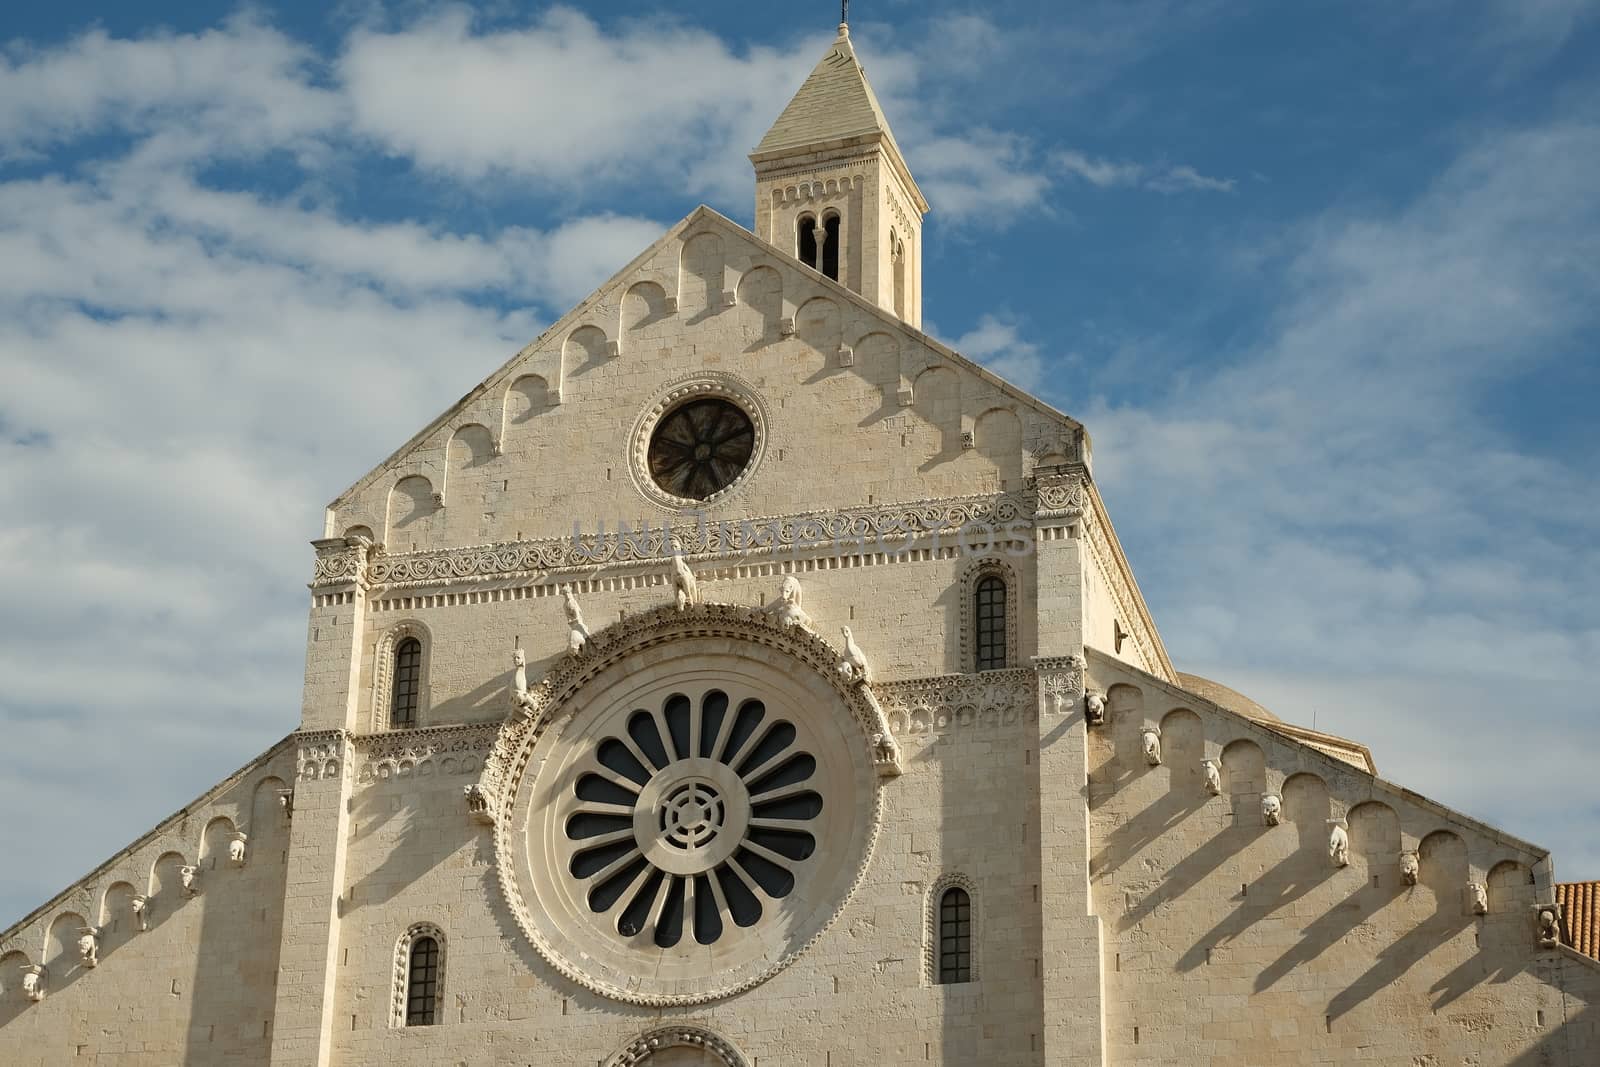 Facade of the Cathedral of San Sabino in Bari in limestone. Church with light stone walls with the blue sky background with clouds. Bari, Puglia, Italy.